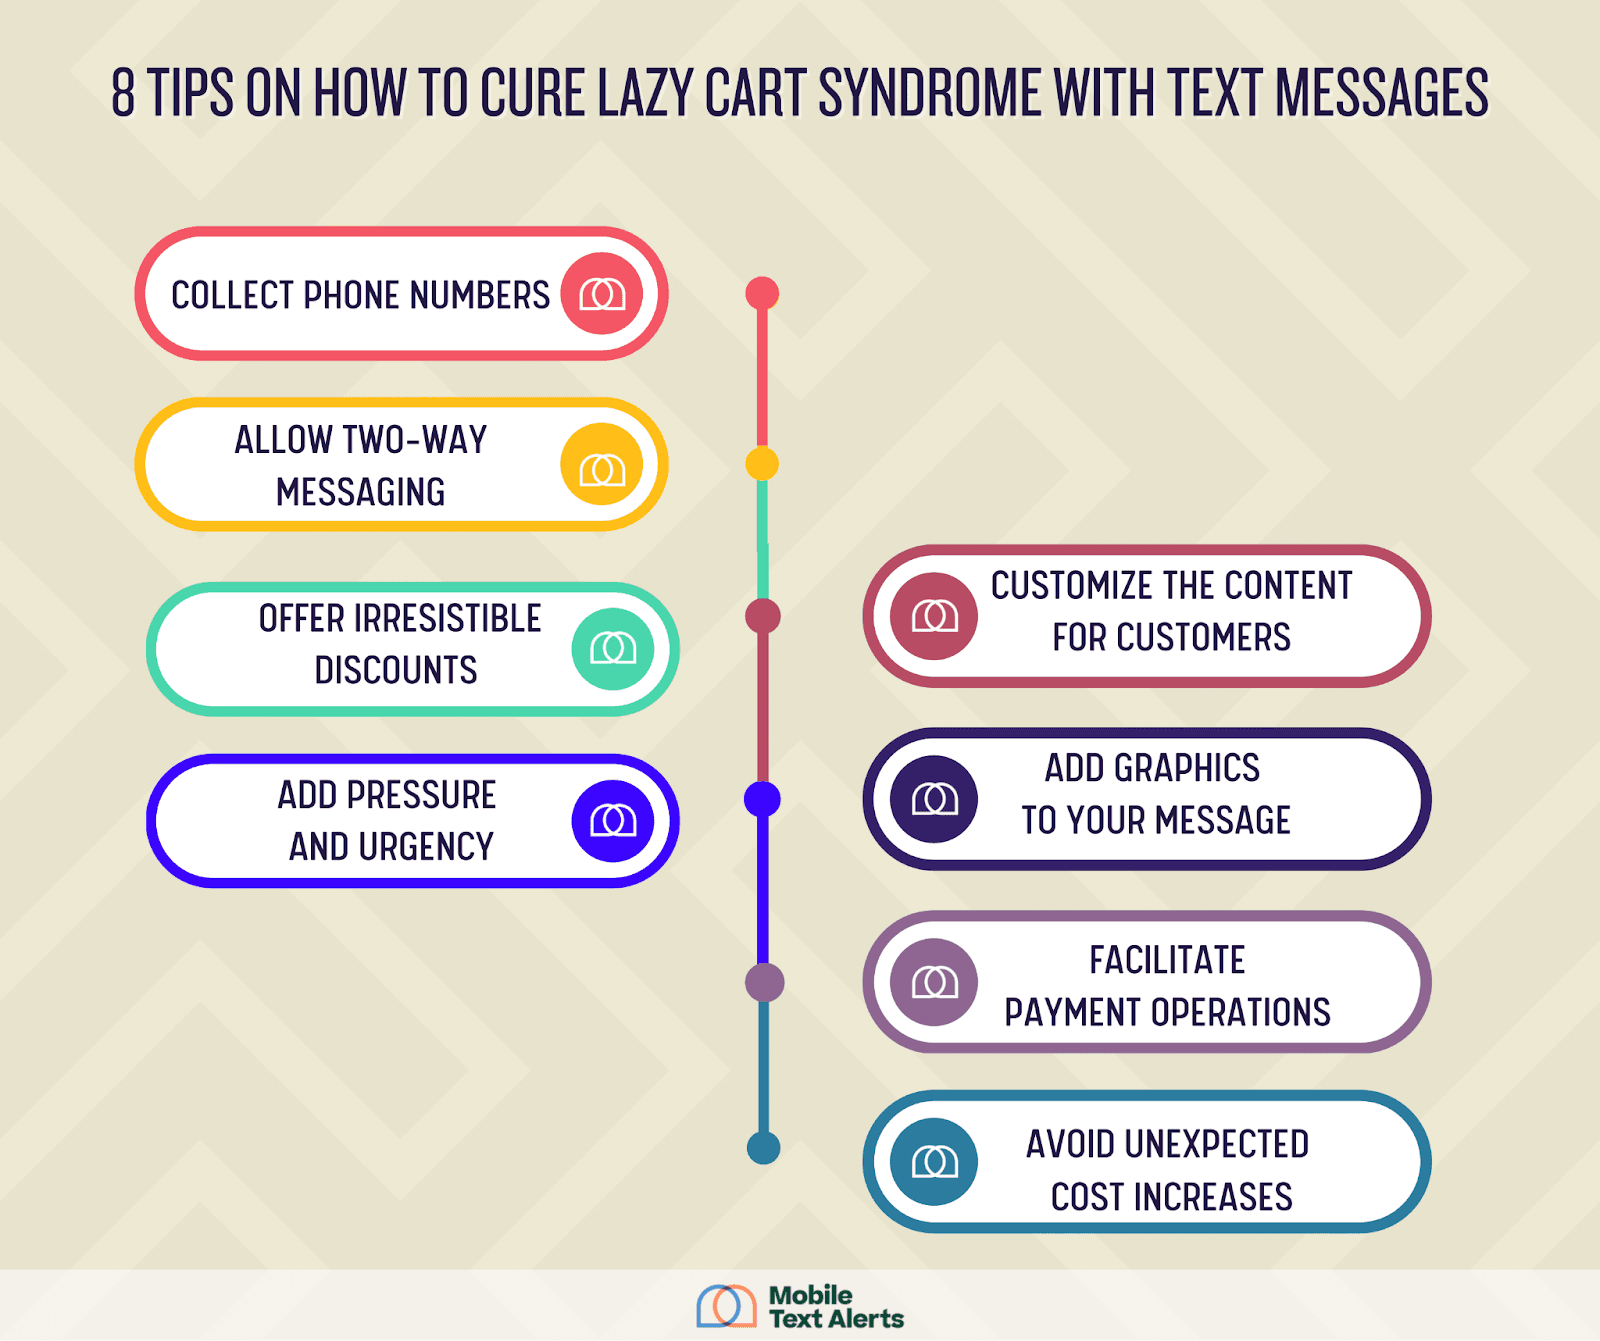 How text messages cure lazy cart syndrome